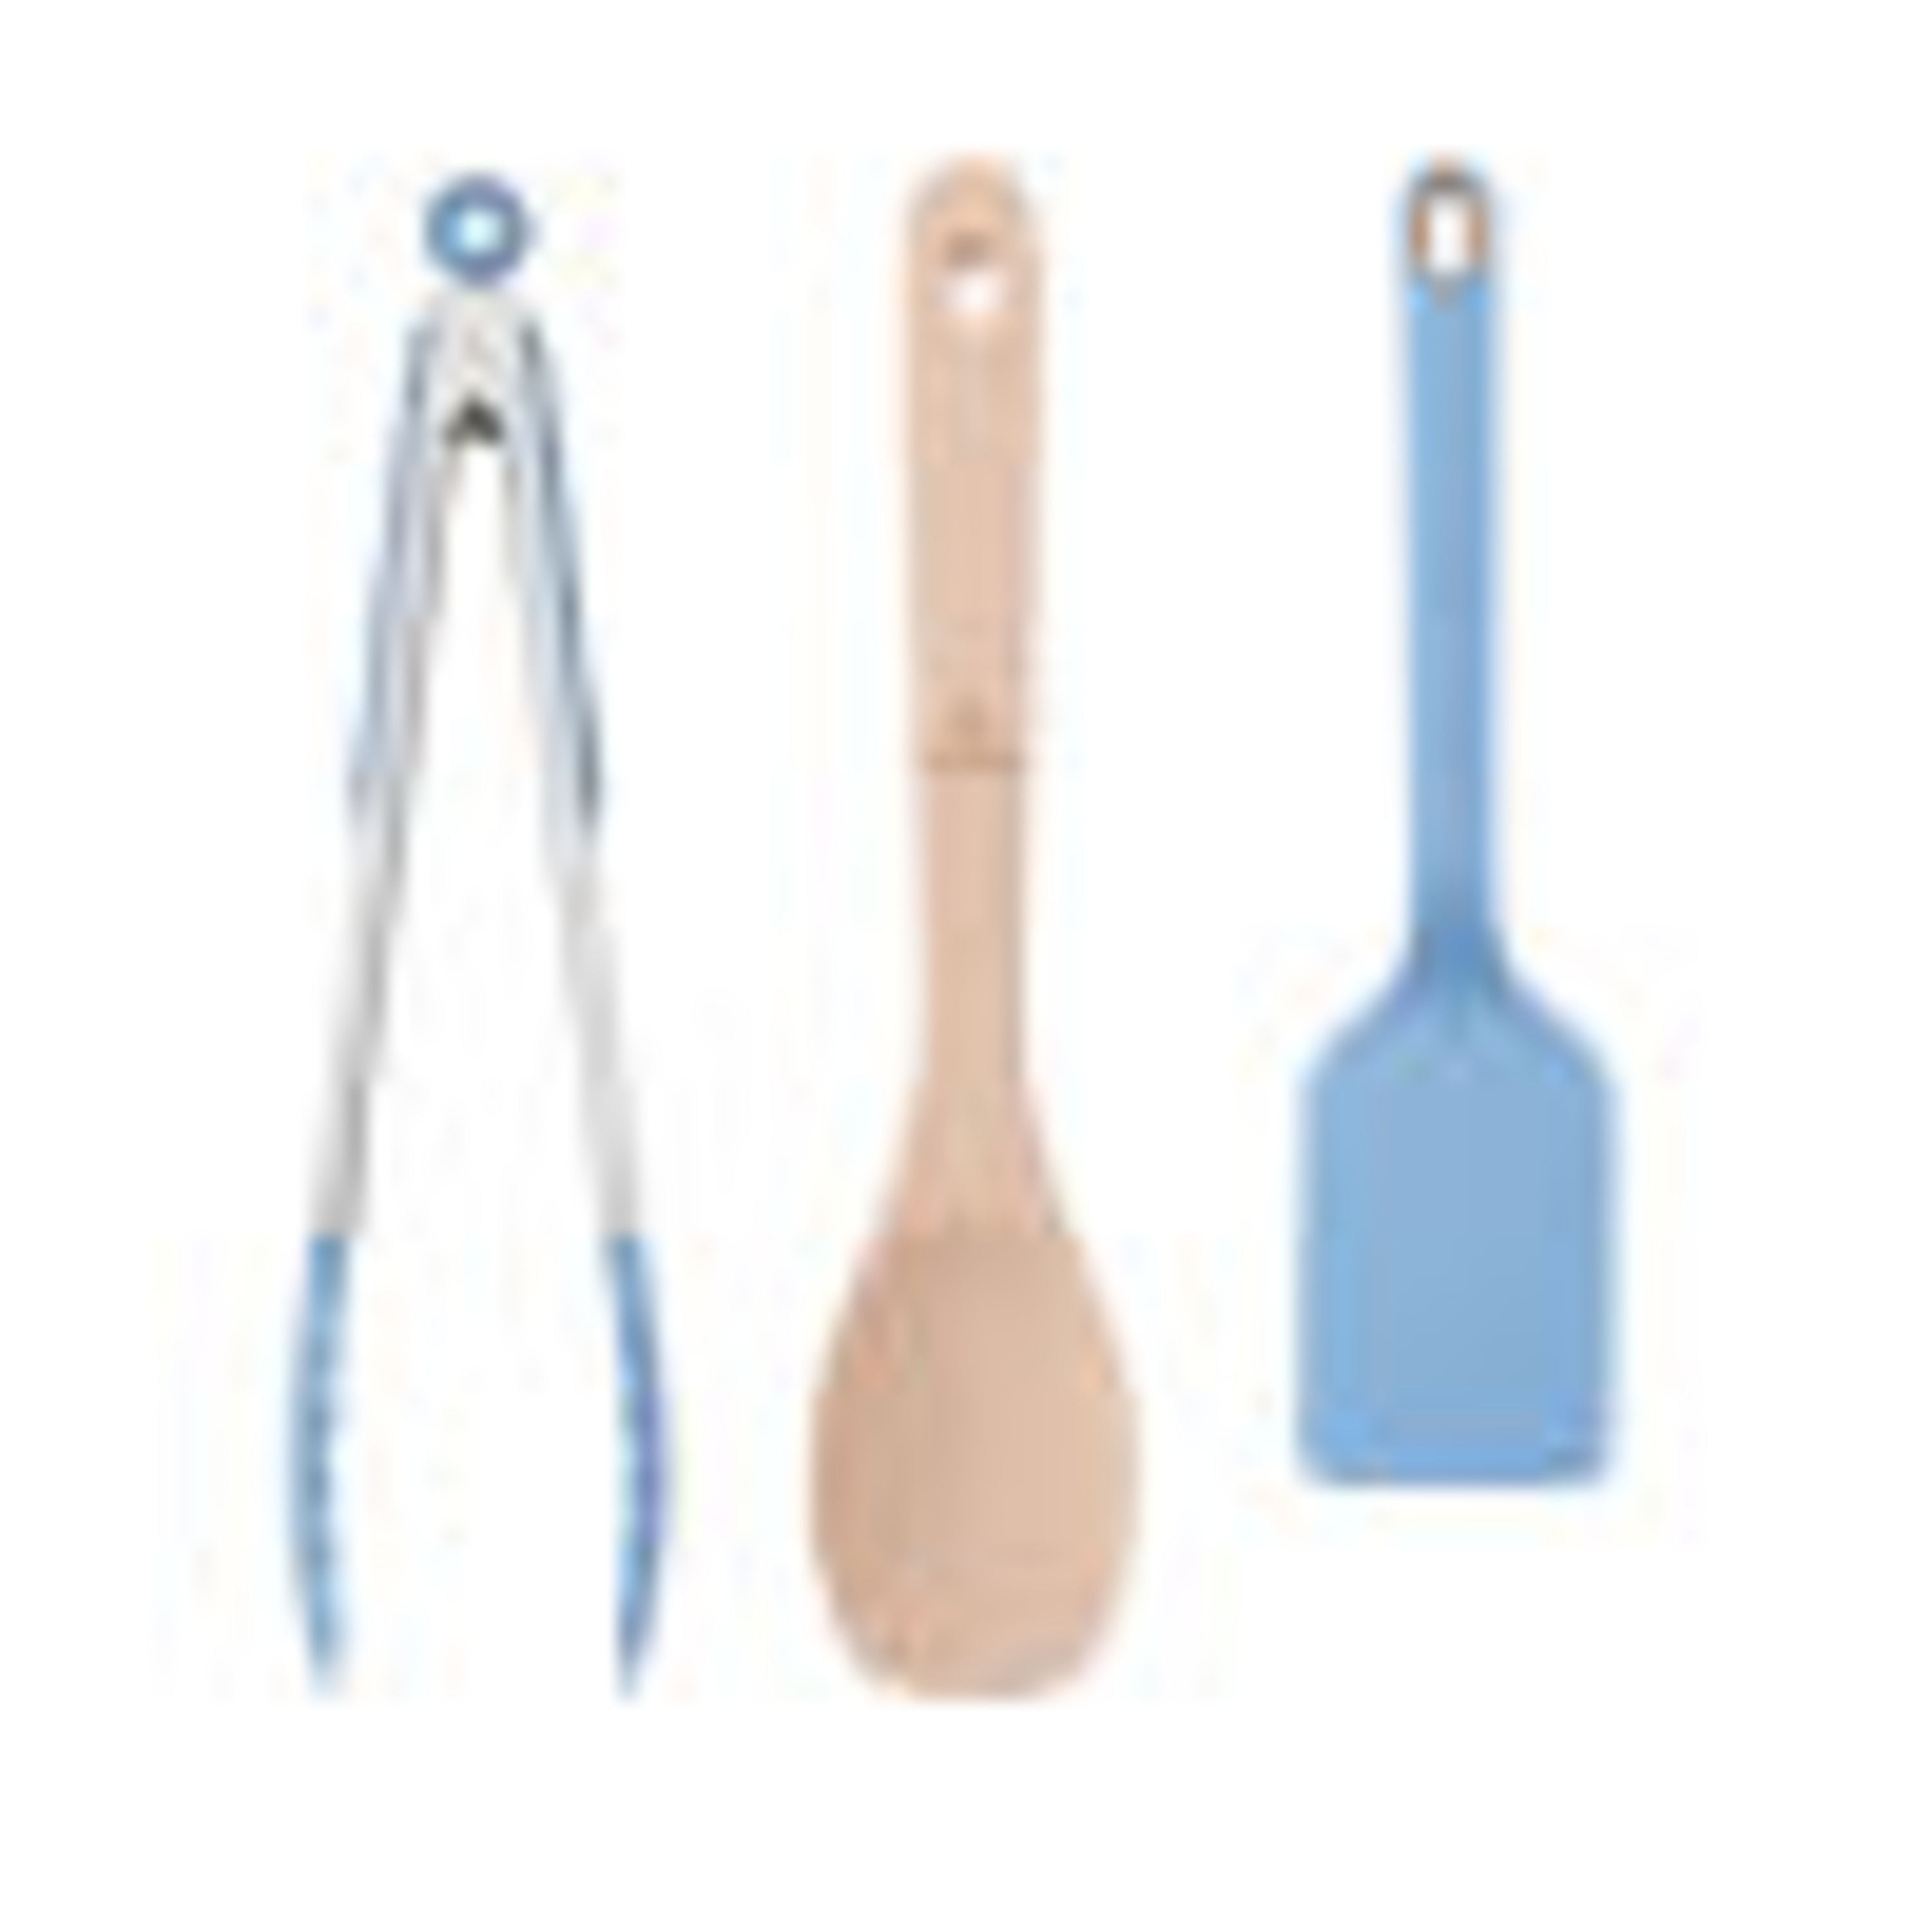 Beautiful 3-piece Essential Cooking Tool Set in Blue Icing by Drew Barrymore